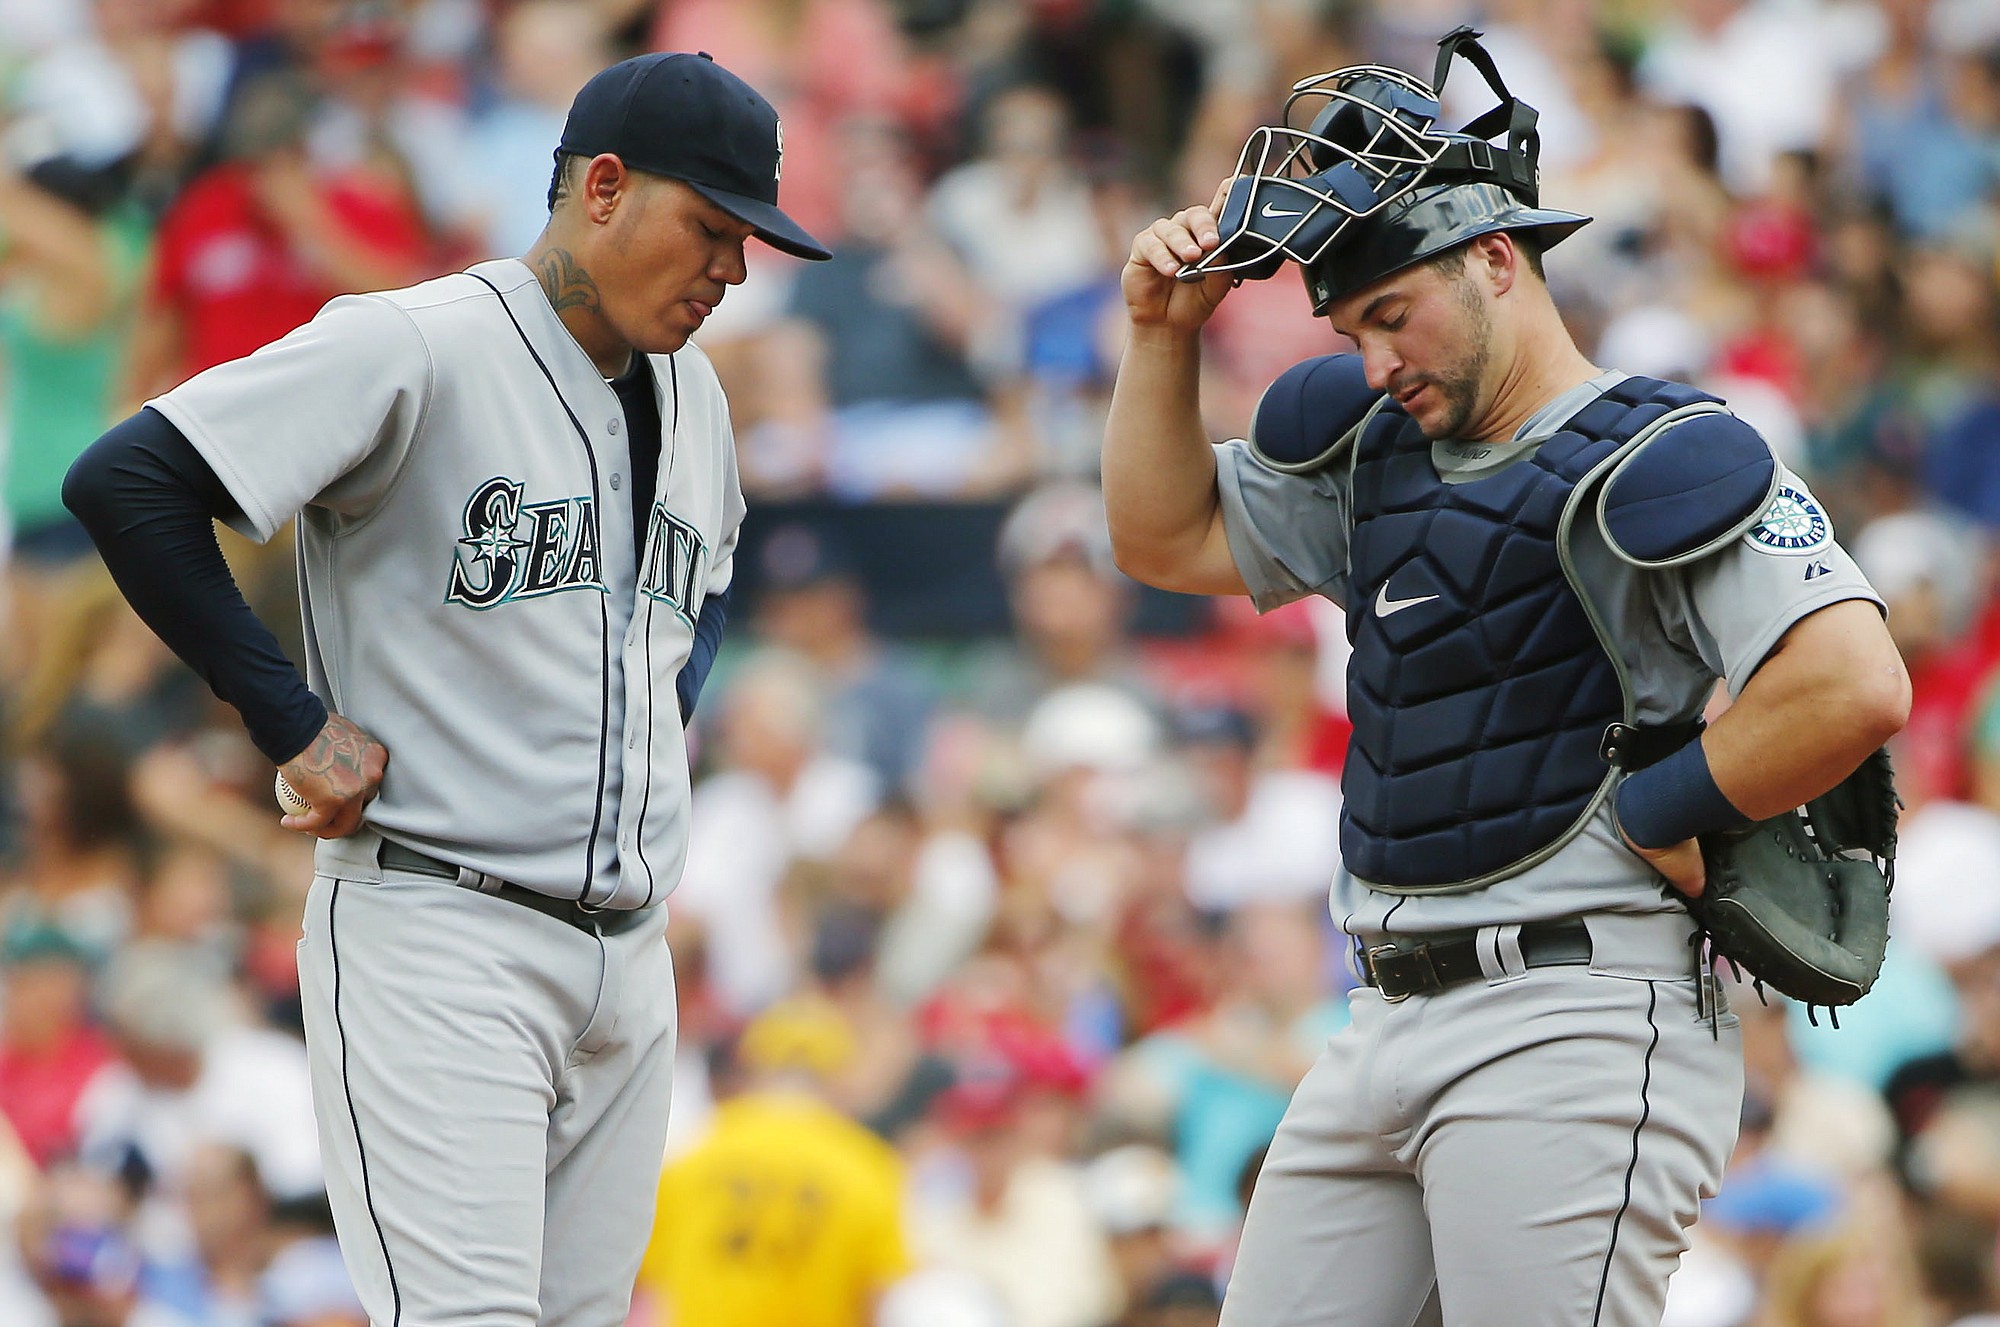 Seattle Mariners starting pitcher Felix Hernandez, left, and catcher Mike Zunino stand on the mound after giving up a run to the Boston Red Sox during the third inning of a baseball game at Fenway Park in Boston Saturday, Aug.